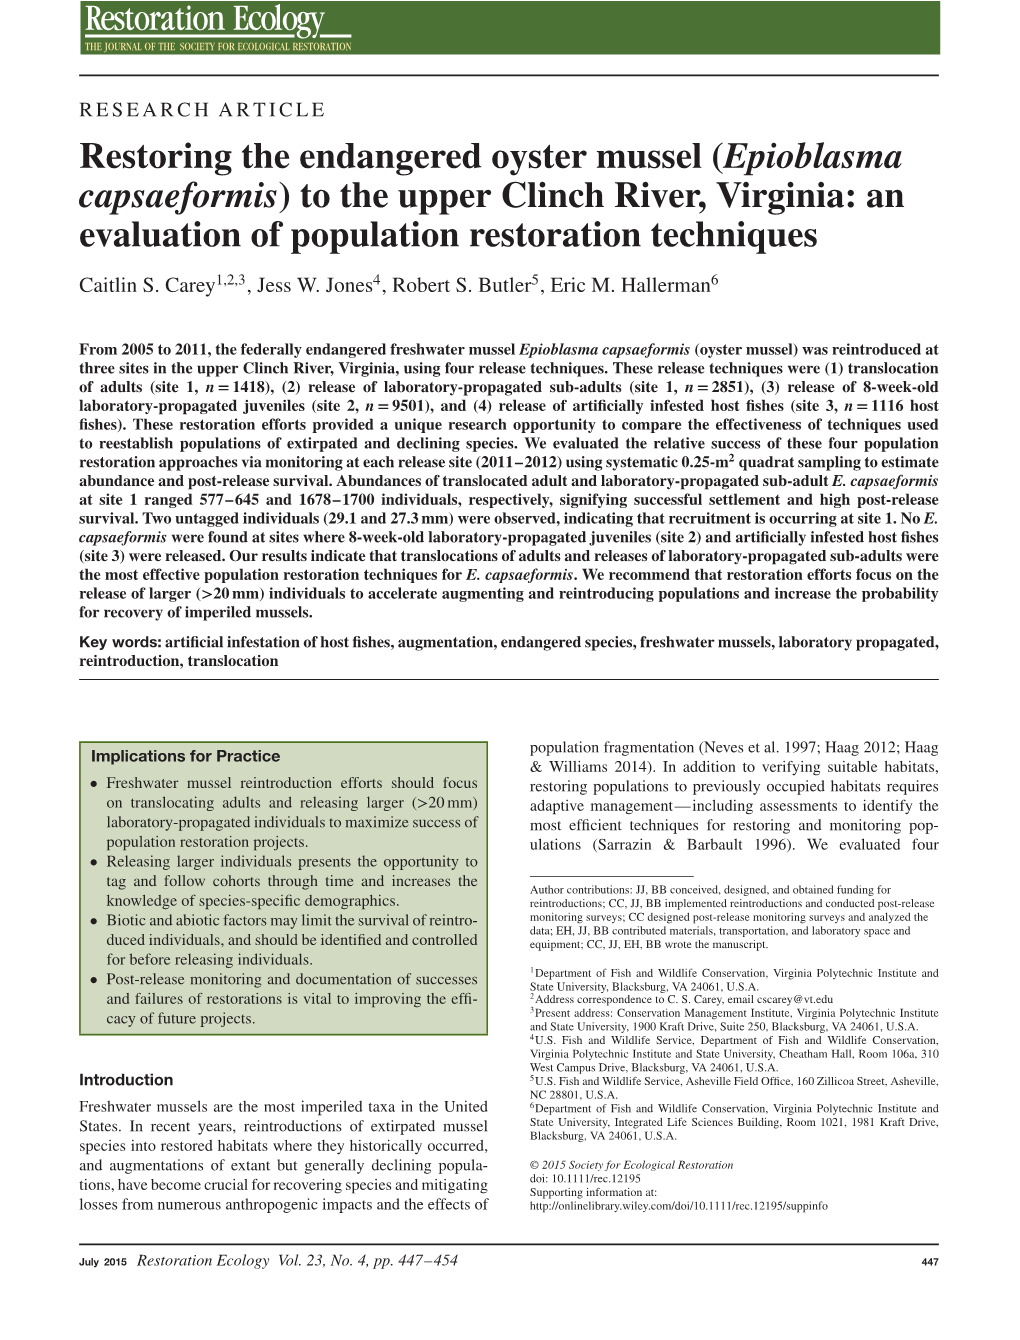 Restoring the Endangered Oyster Mussel (Epioblasma Capsaeformis) to the Upper Clinch River, Virginia: an Evaluation of Population Restoration Techniques Caitlin S